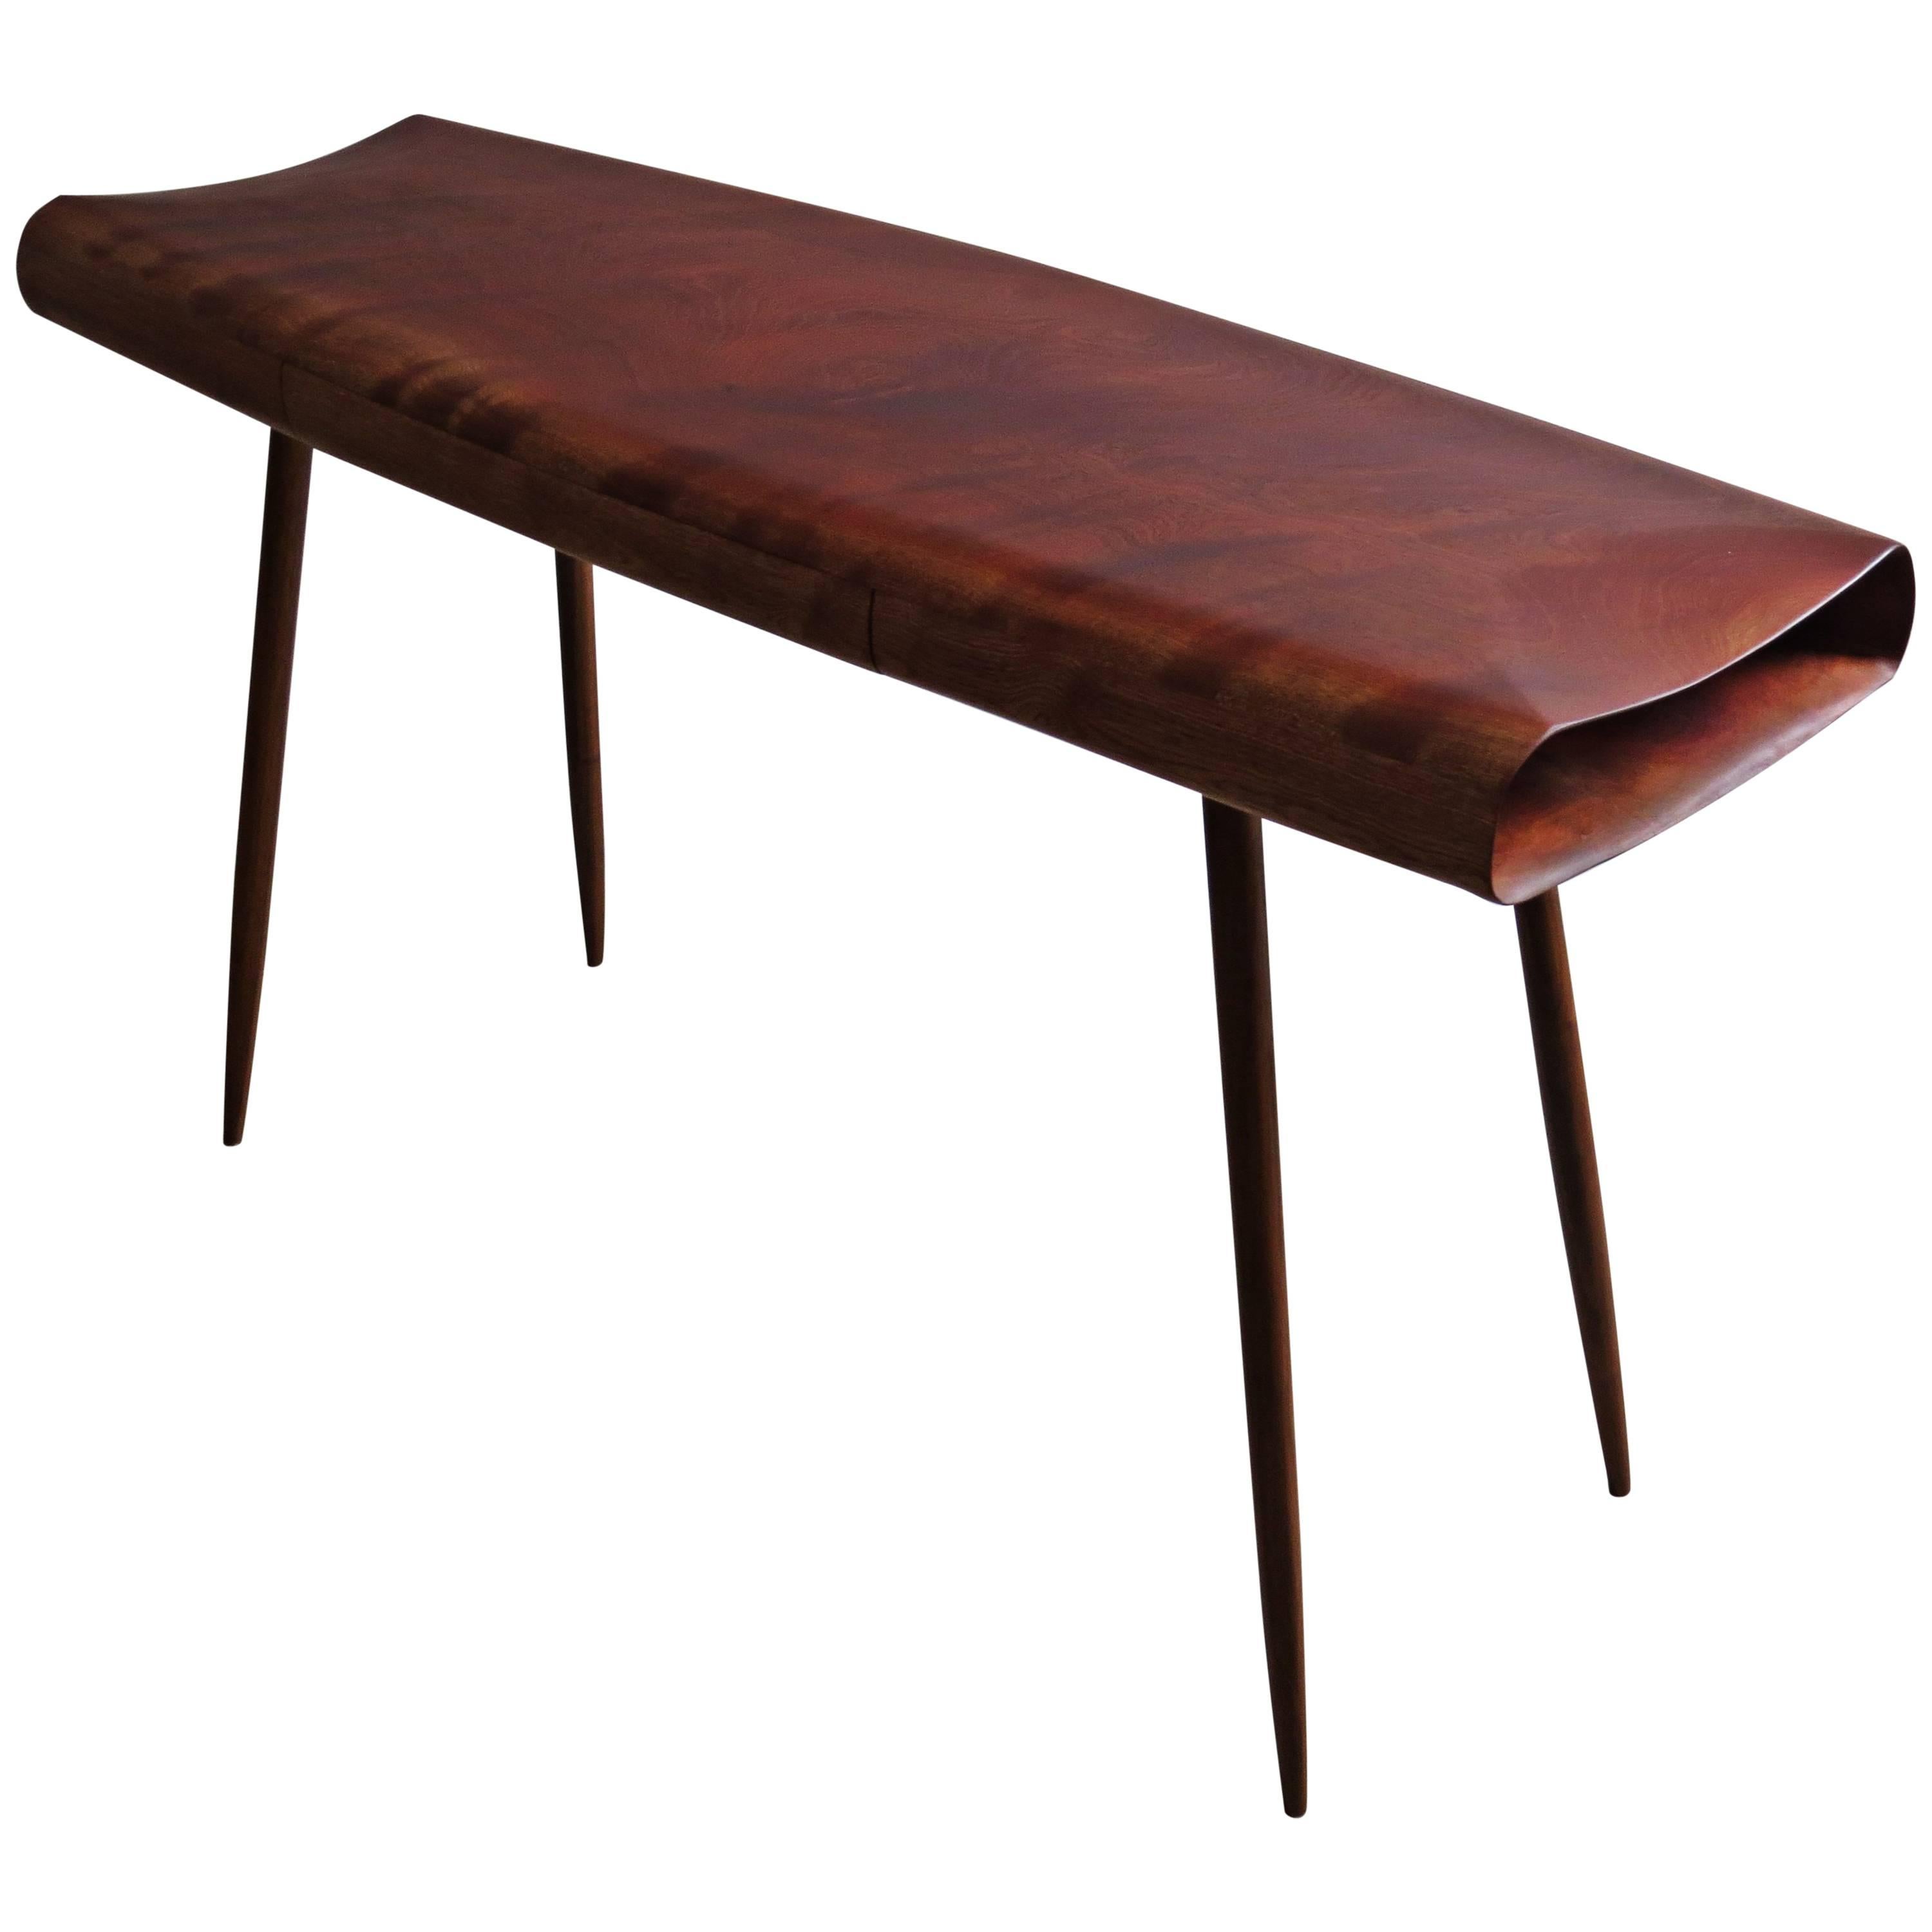 Solid Wood Desk Console Handmade in Organic Design For Sale